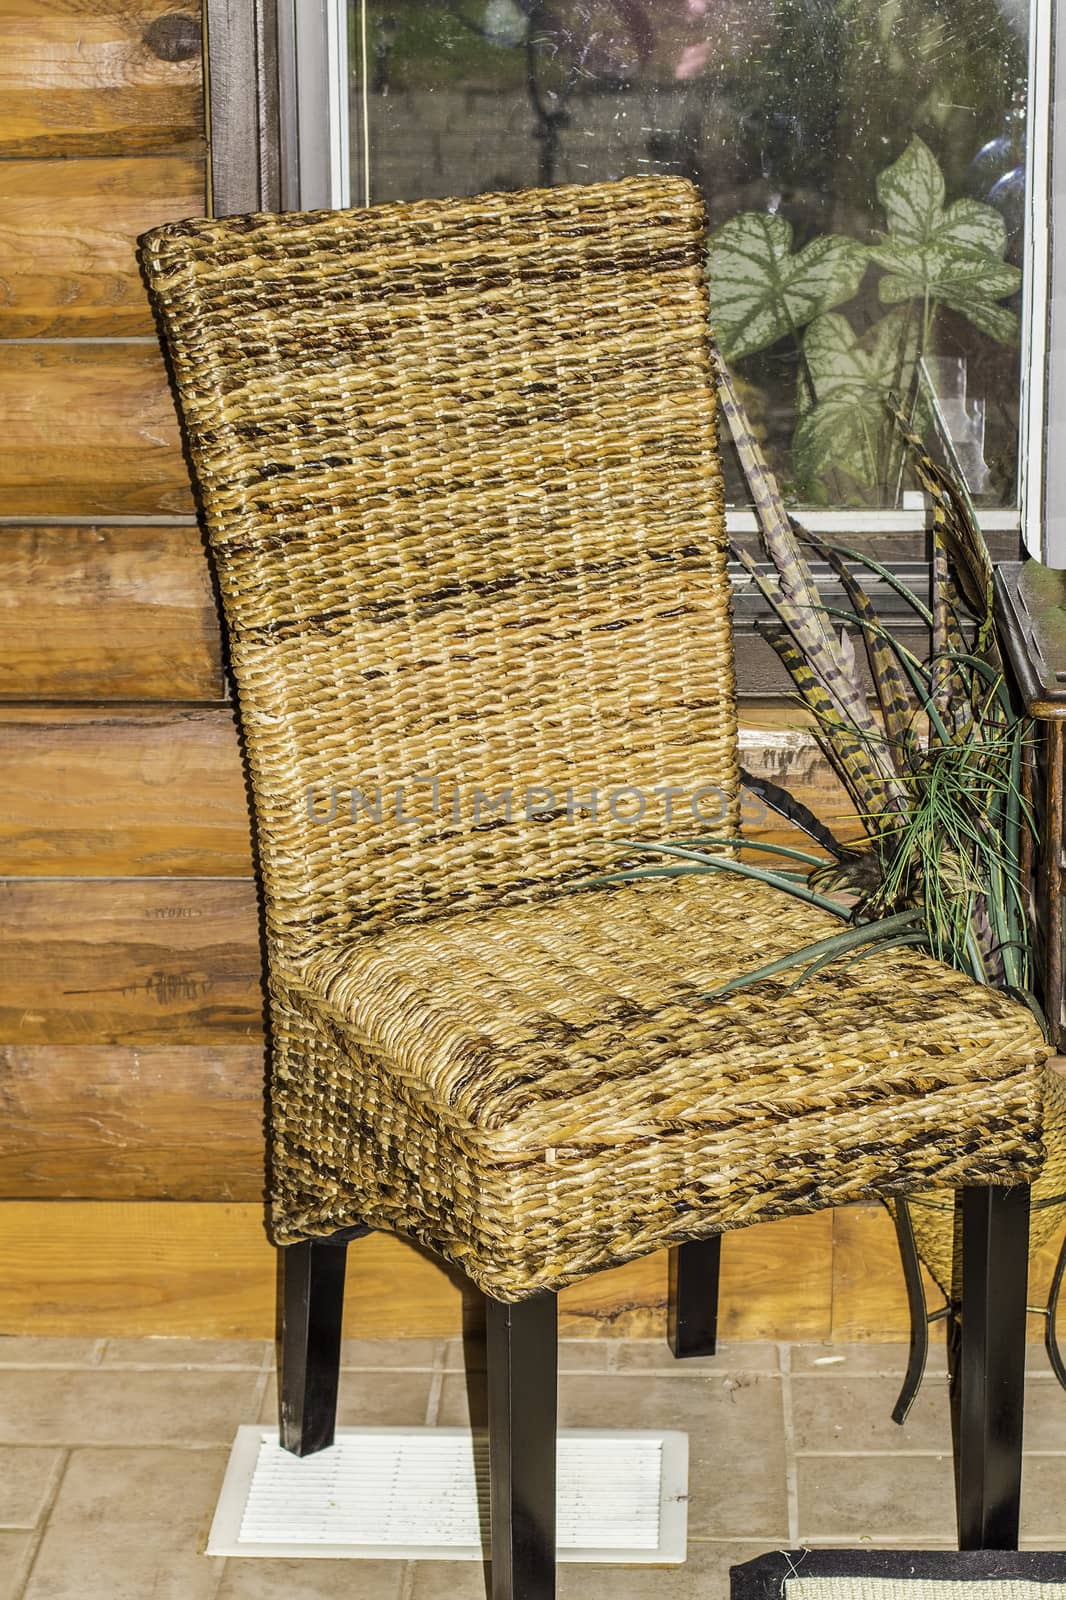 A wicker material chair sitting by a window in a log cabin.